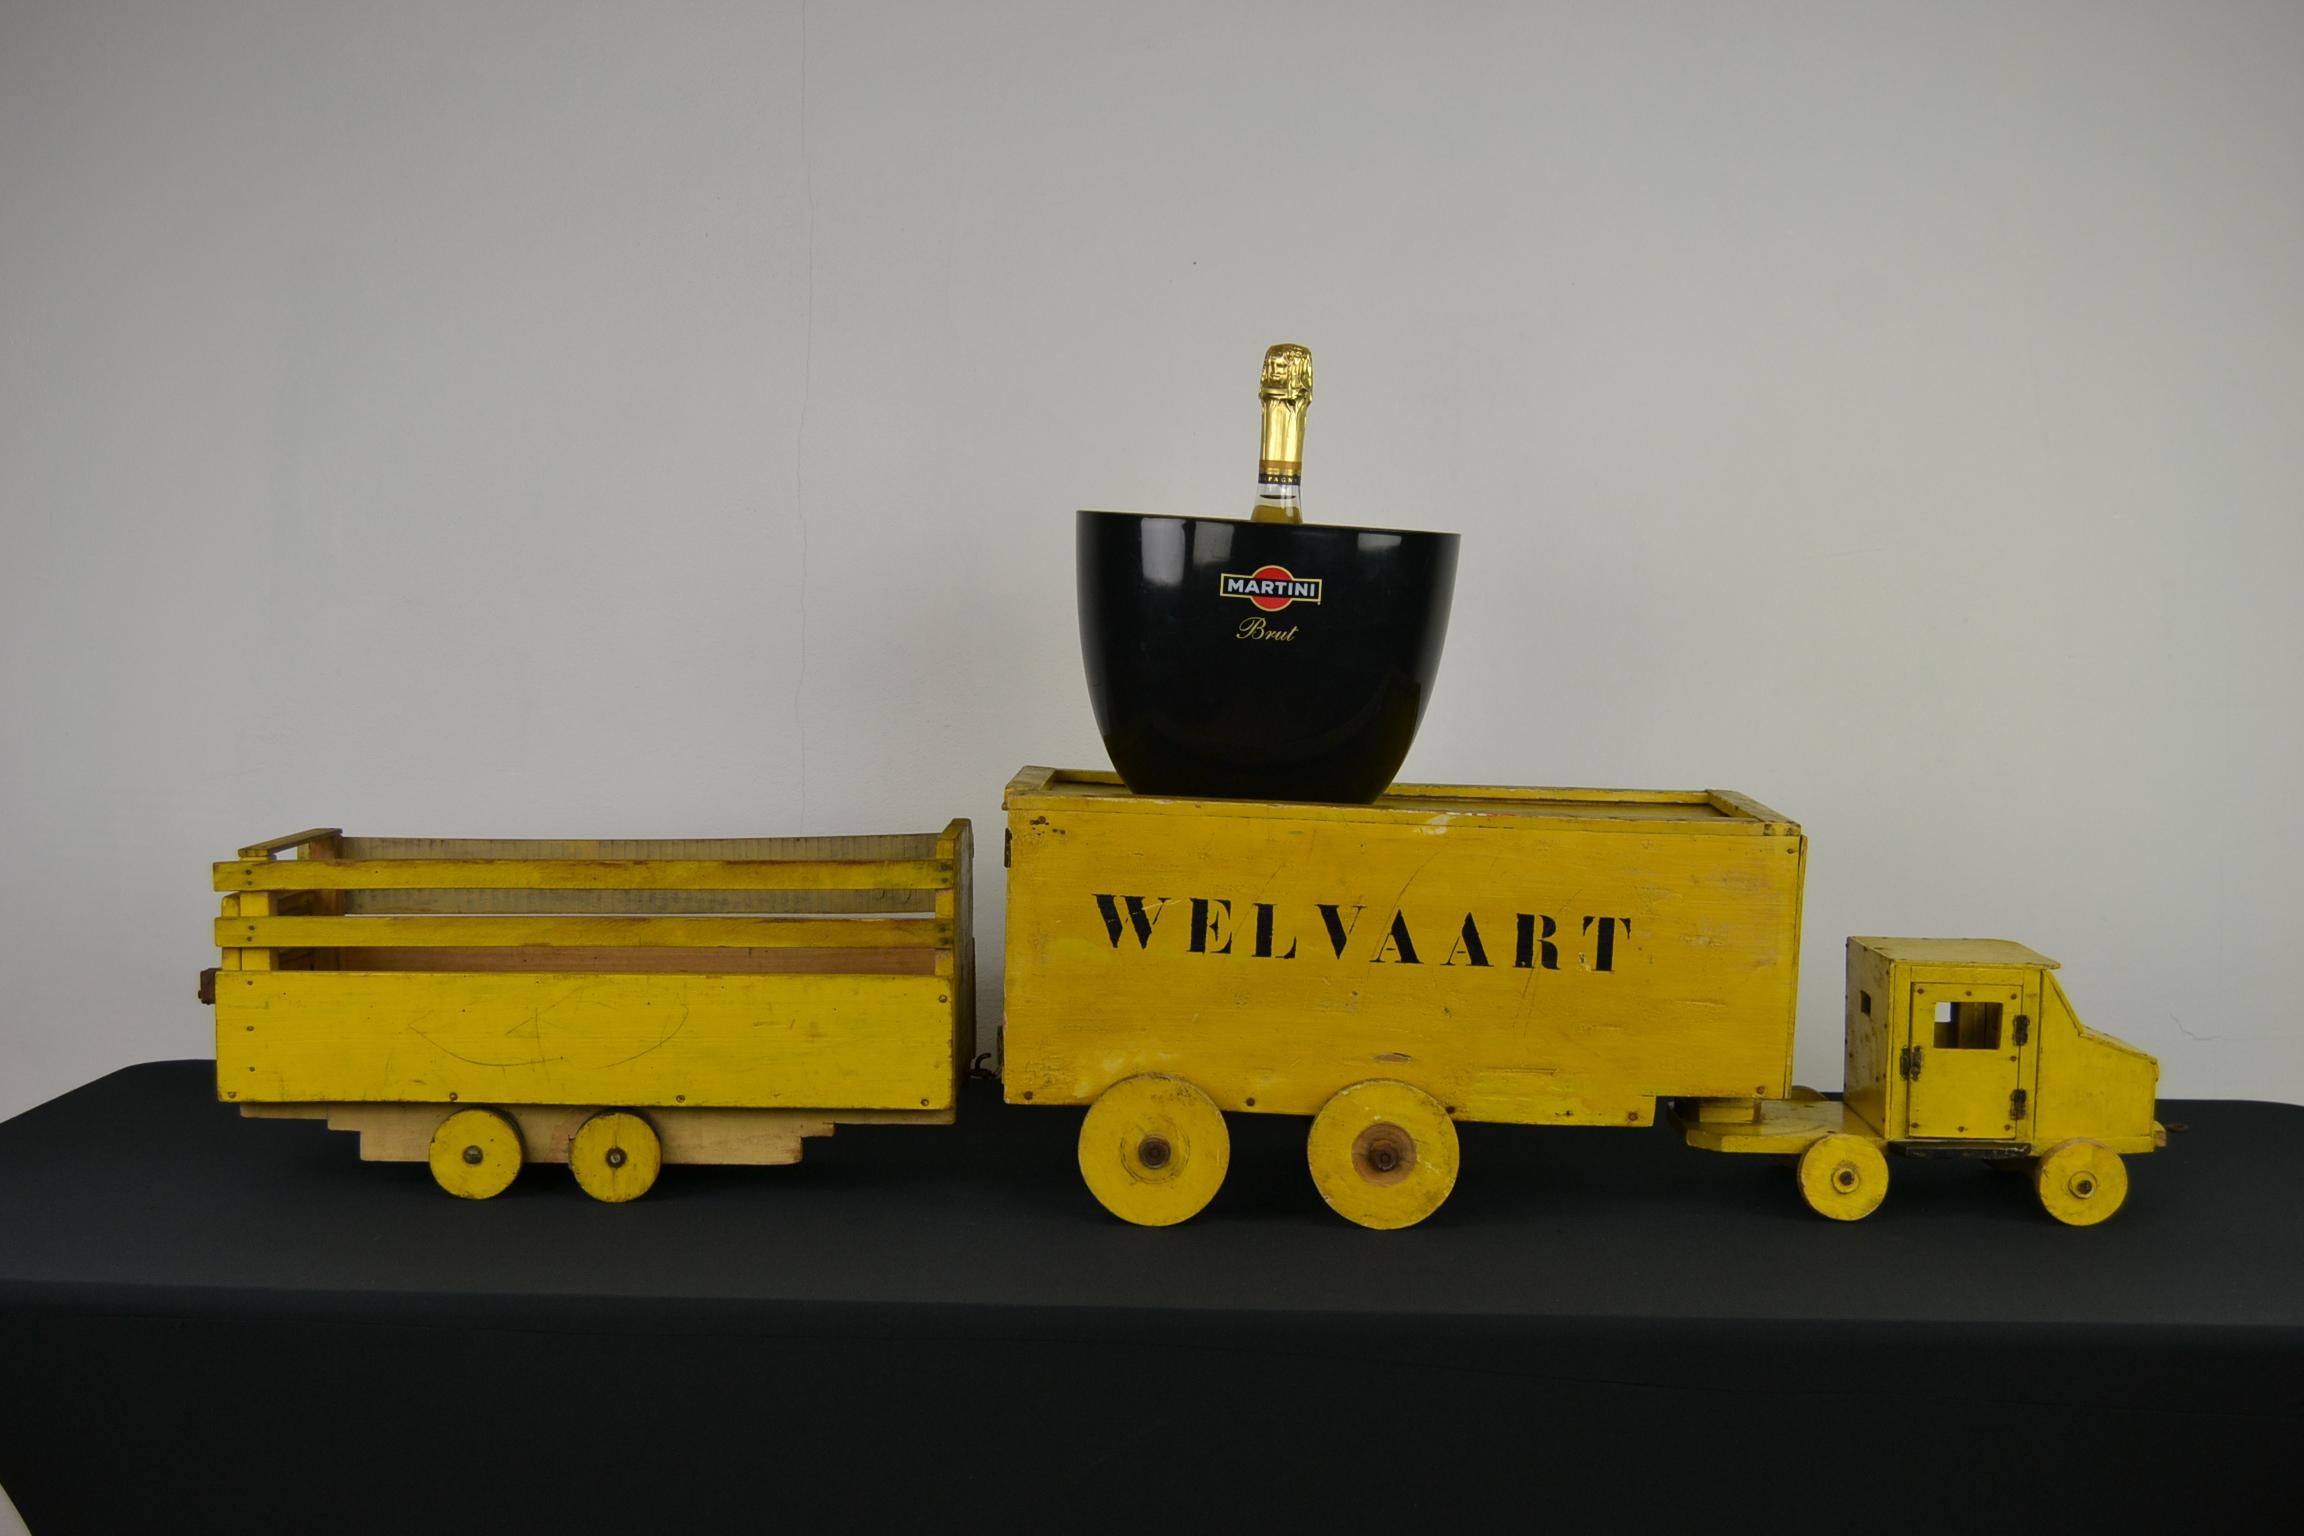 Folk Art wooden toy truck with trailers.
This extra large wooden toy consists of 3 pieces: a cabin with 2 livestock trailers, all in yellow painted color. 
The cabin has 2 doors which can be opened. The middle trailer has a roof which can be slided